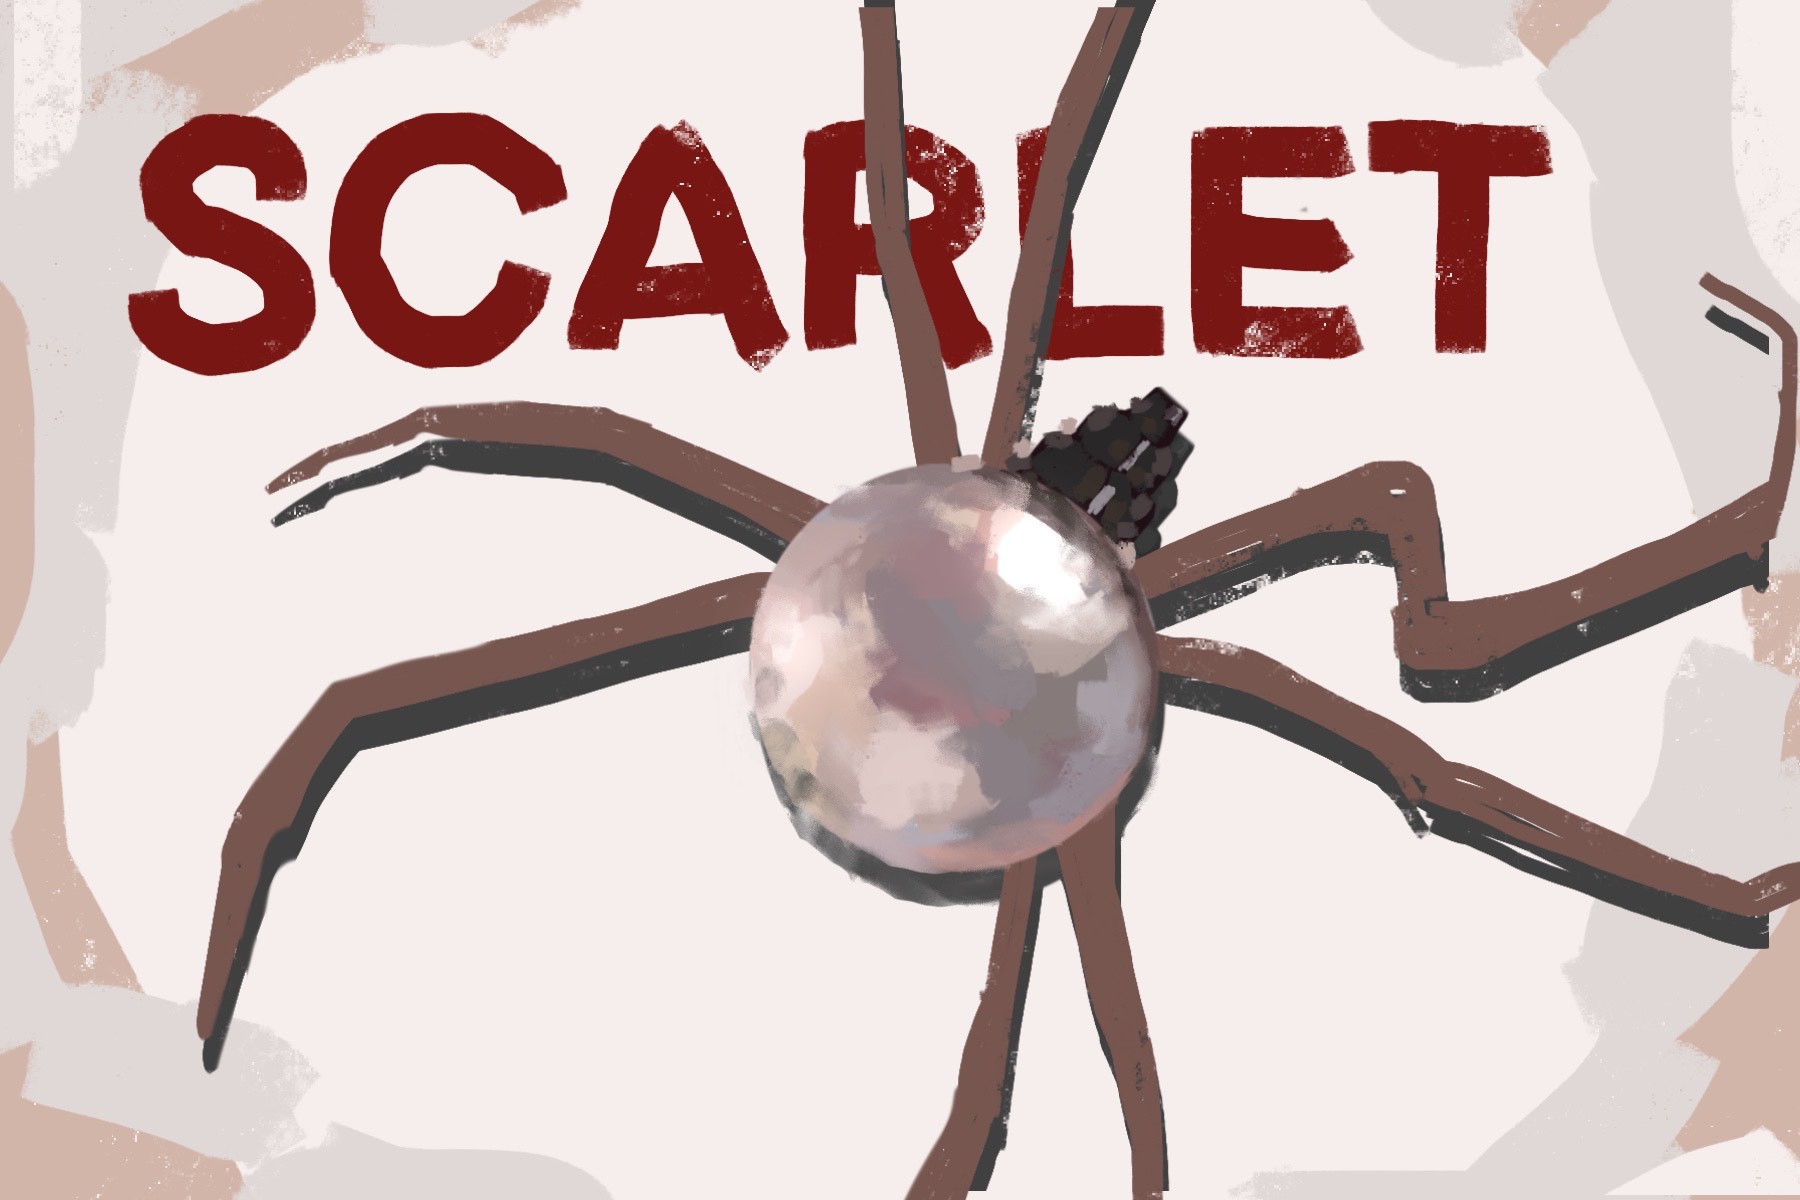 Doja Cat releases demons in her newly dropped 'Scarlet